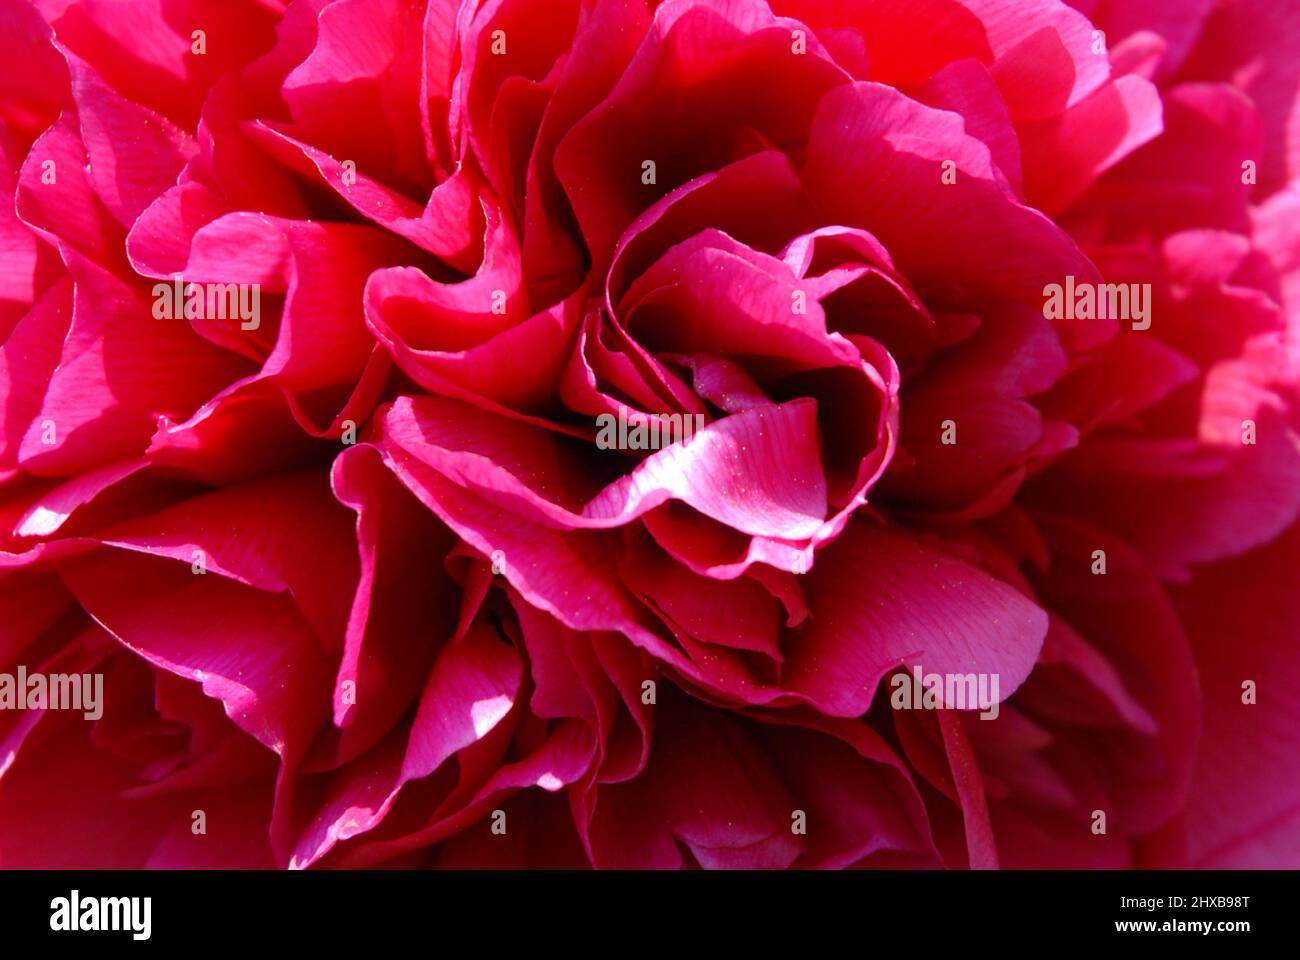 detail of red peony petals in sunlight Stock Photo